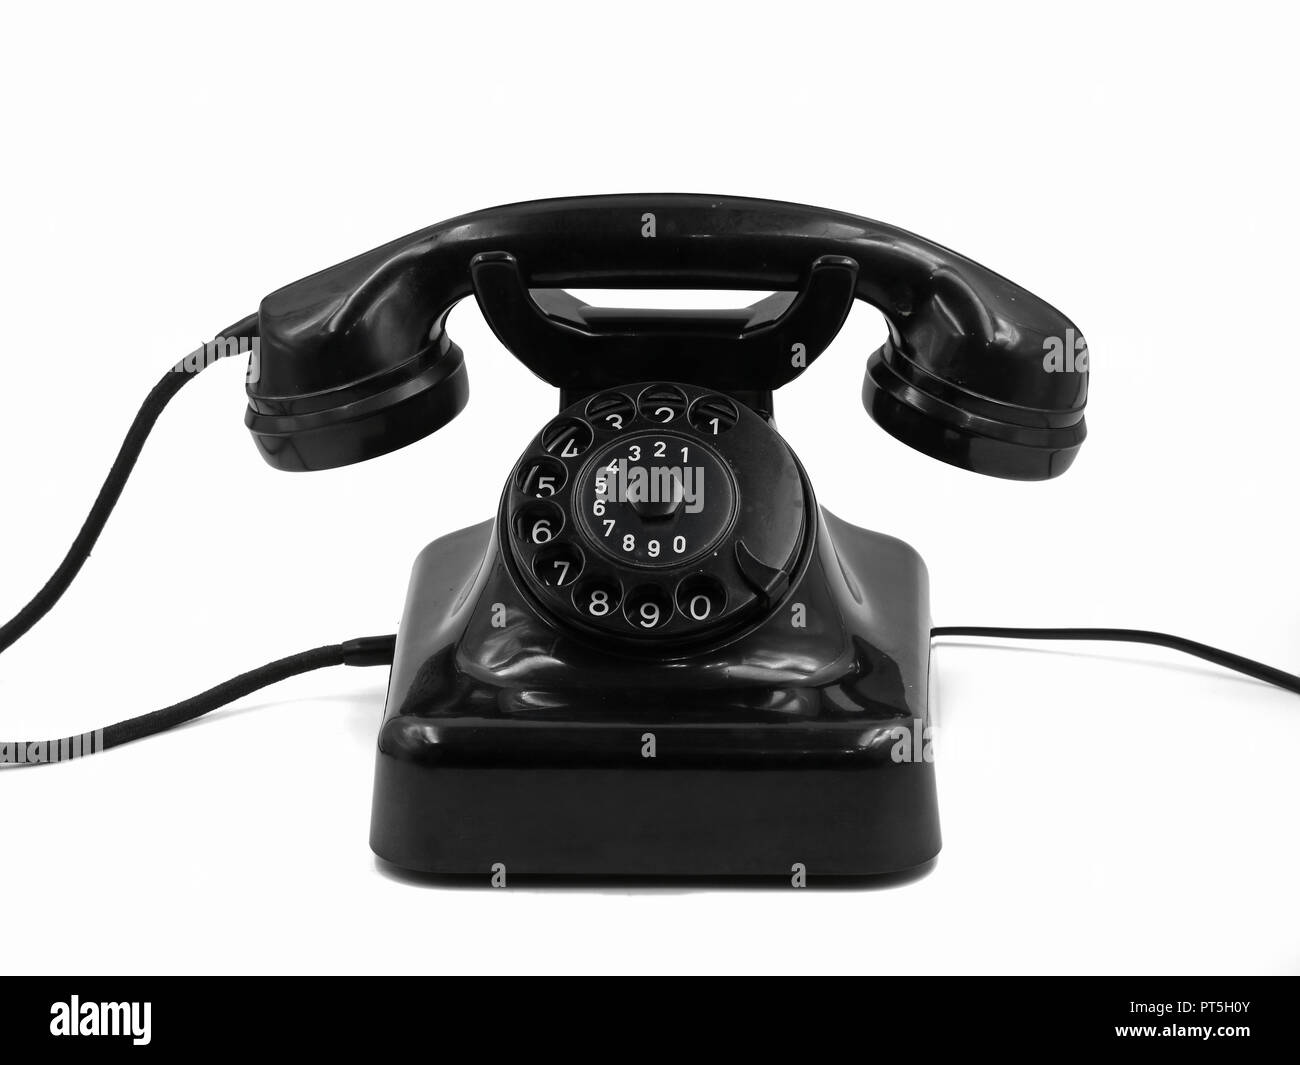 front view of old vintage black rotary dial telephone isolated on white background, retro bakelite phone Stock Photo